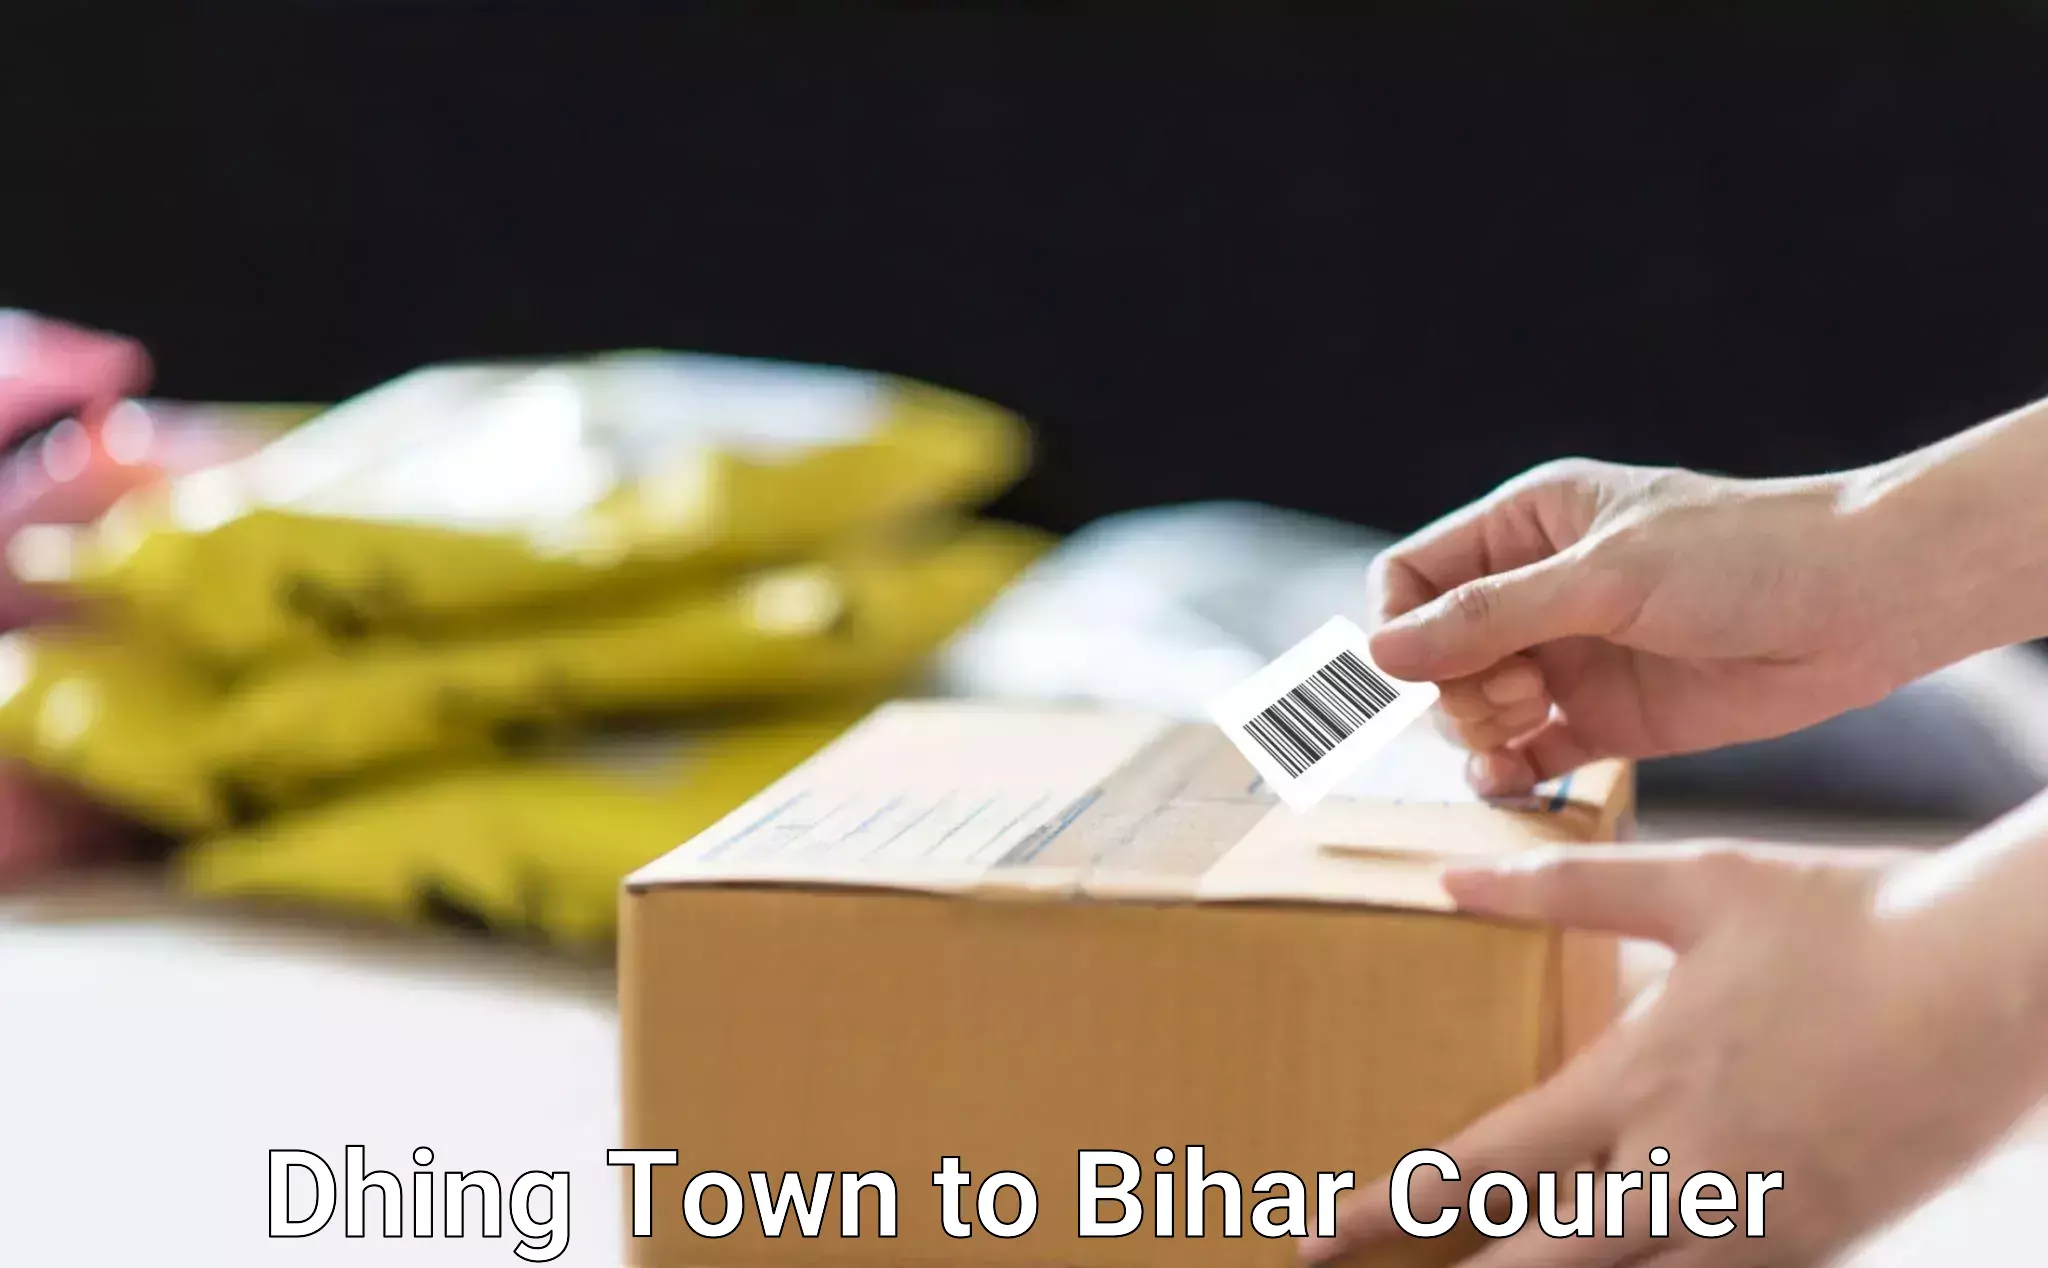 State-of-the-art courier technology Dhing Town to Bihar